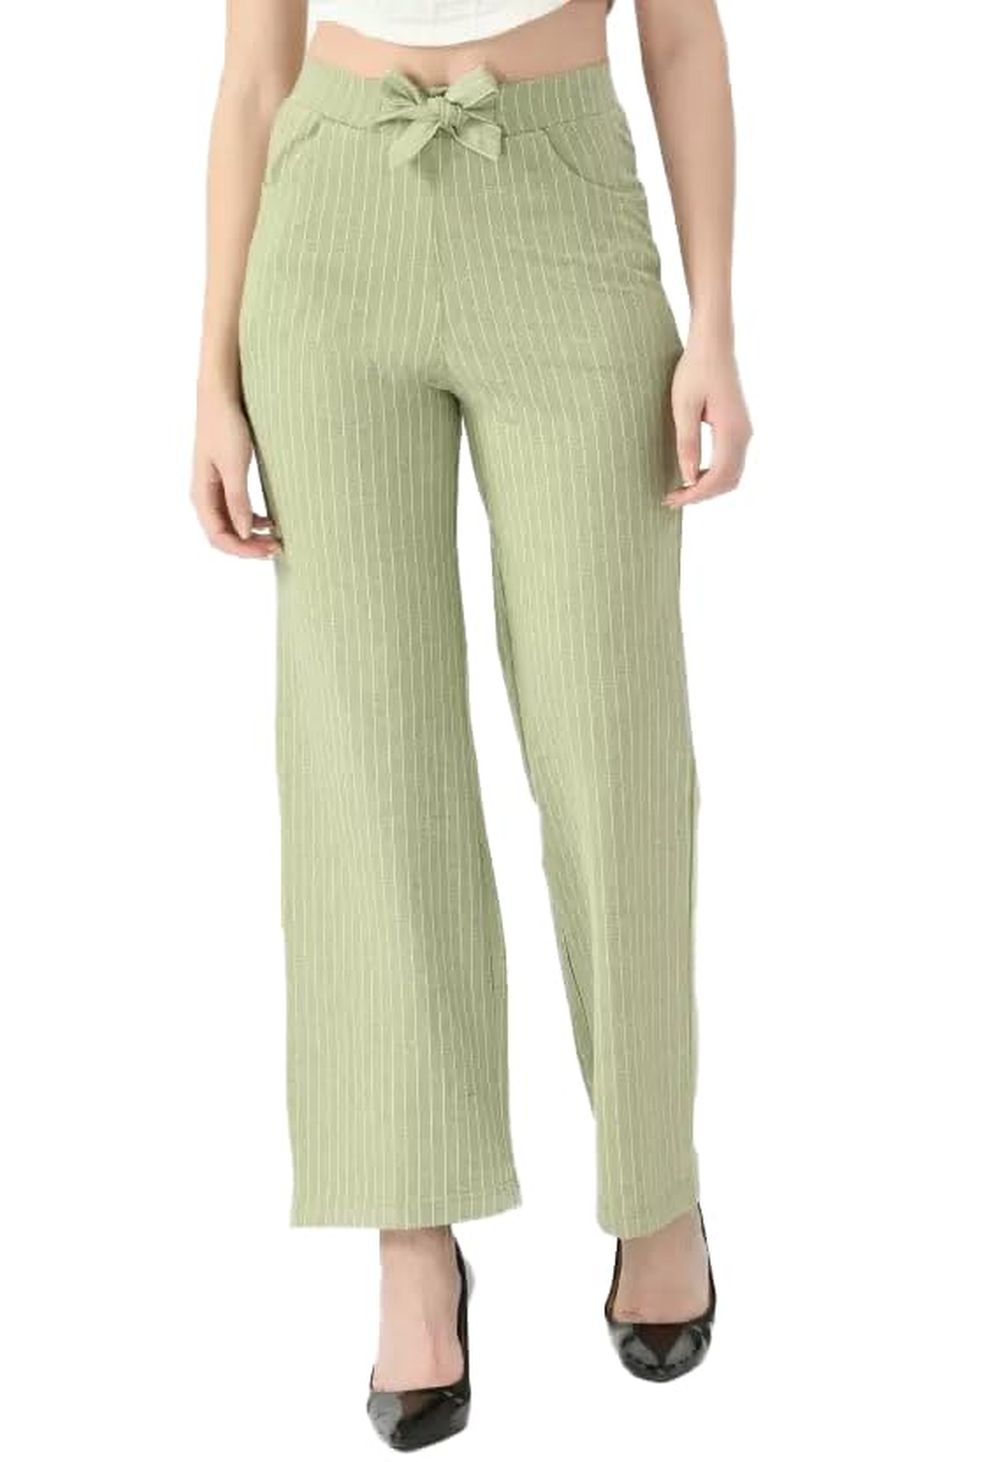 Outerwear Regular Fit Women Pink Trousers - Buy Outerwear Regular Fit Women  Pink Trousers Online at Best Prices in India | Flipkart.com